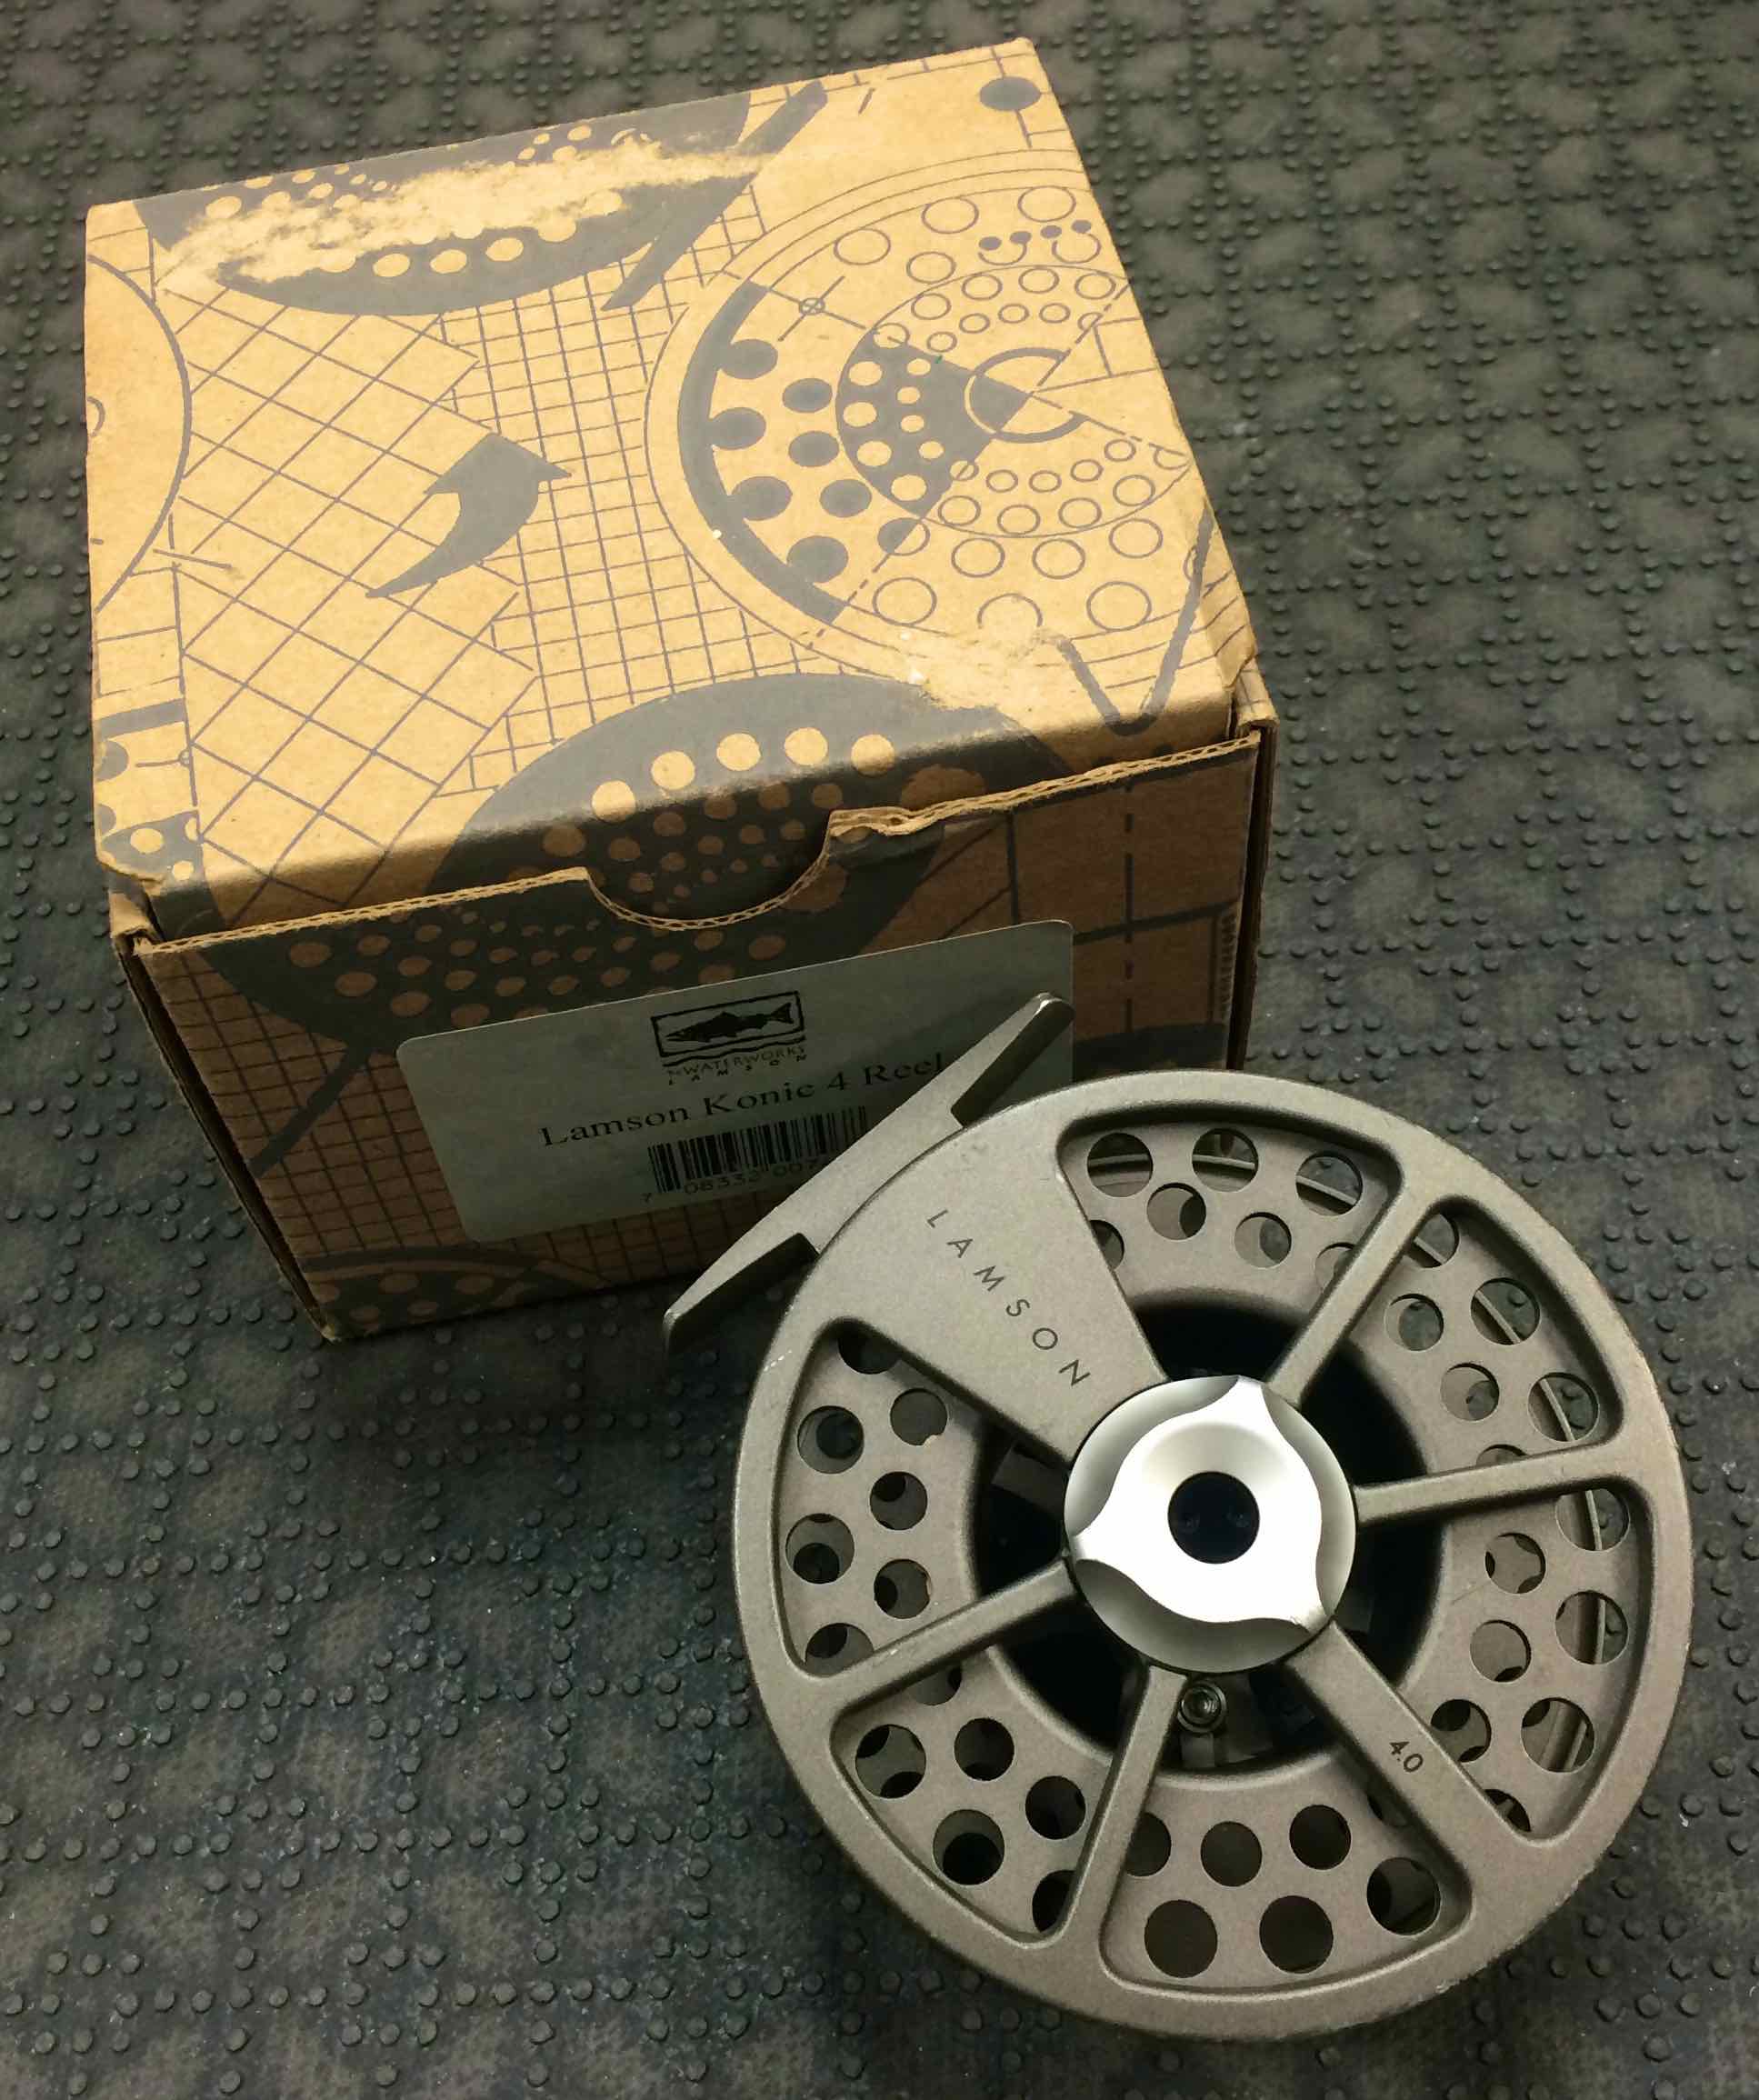 SOLD – Lamson Konic 4.0 – $60 – The First Cast – Hook, Line and